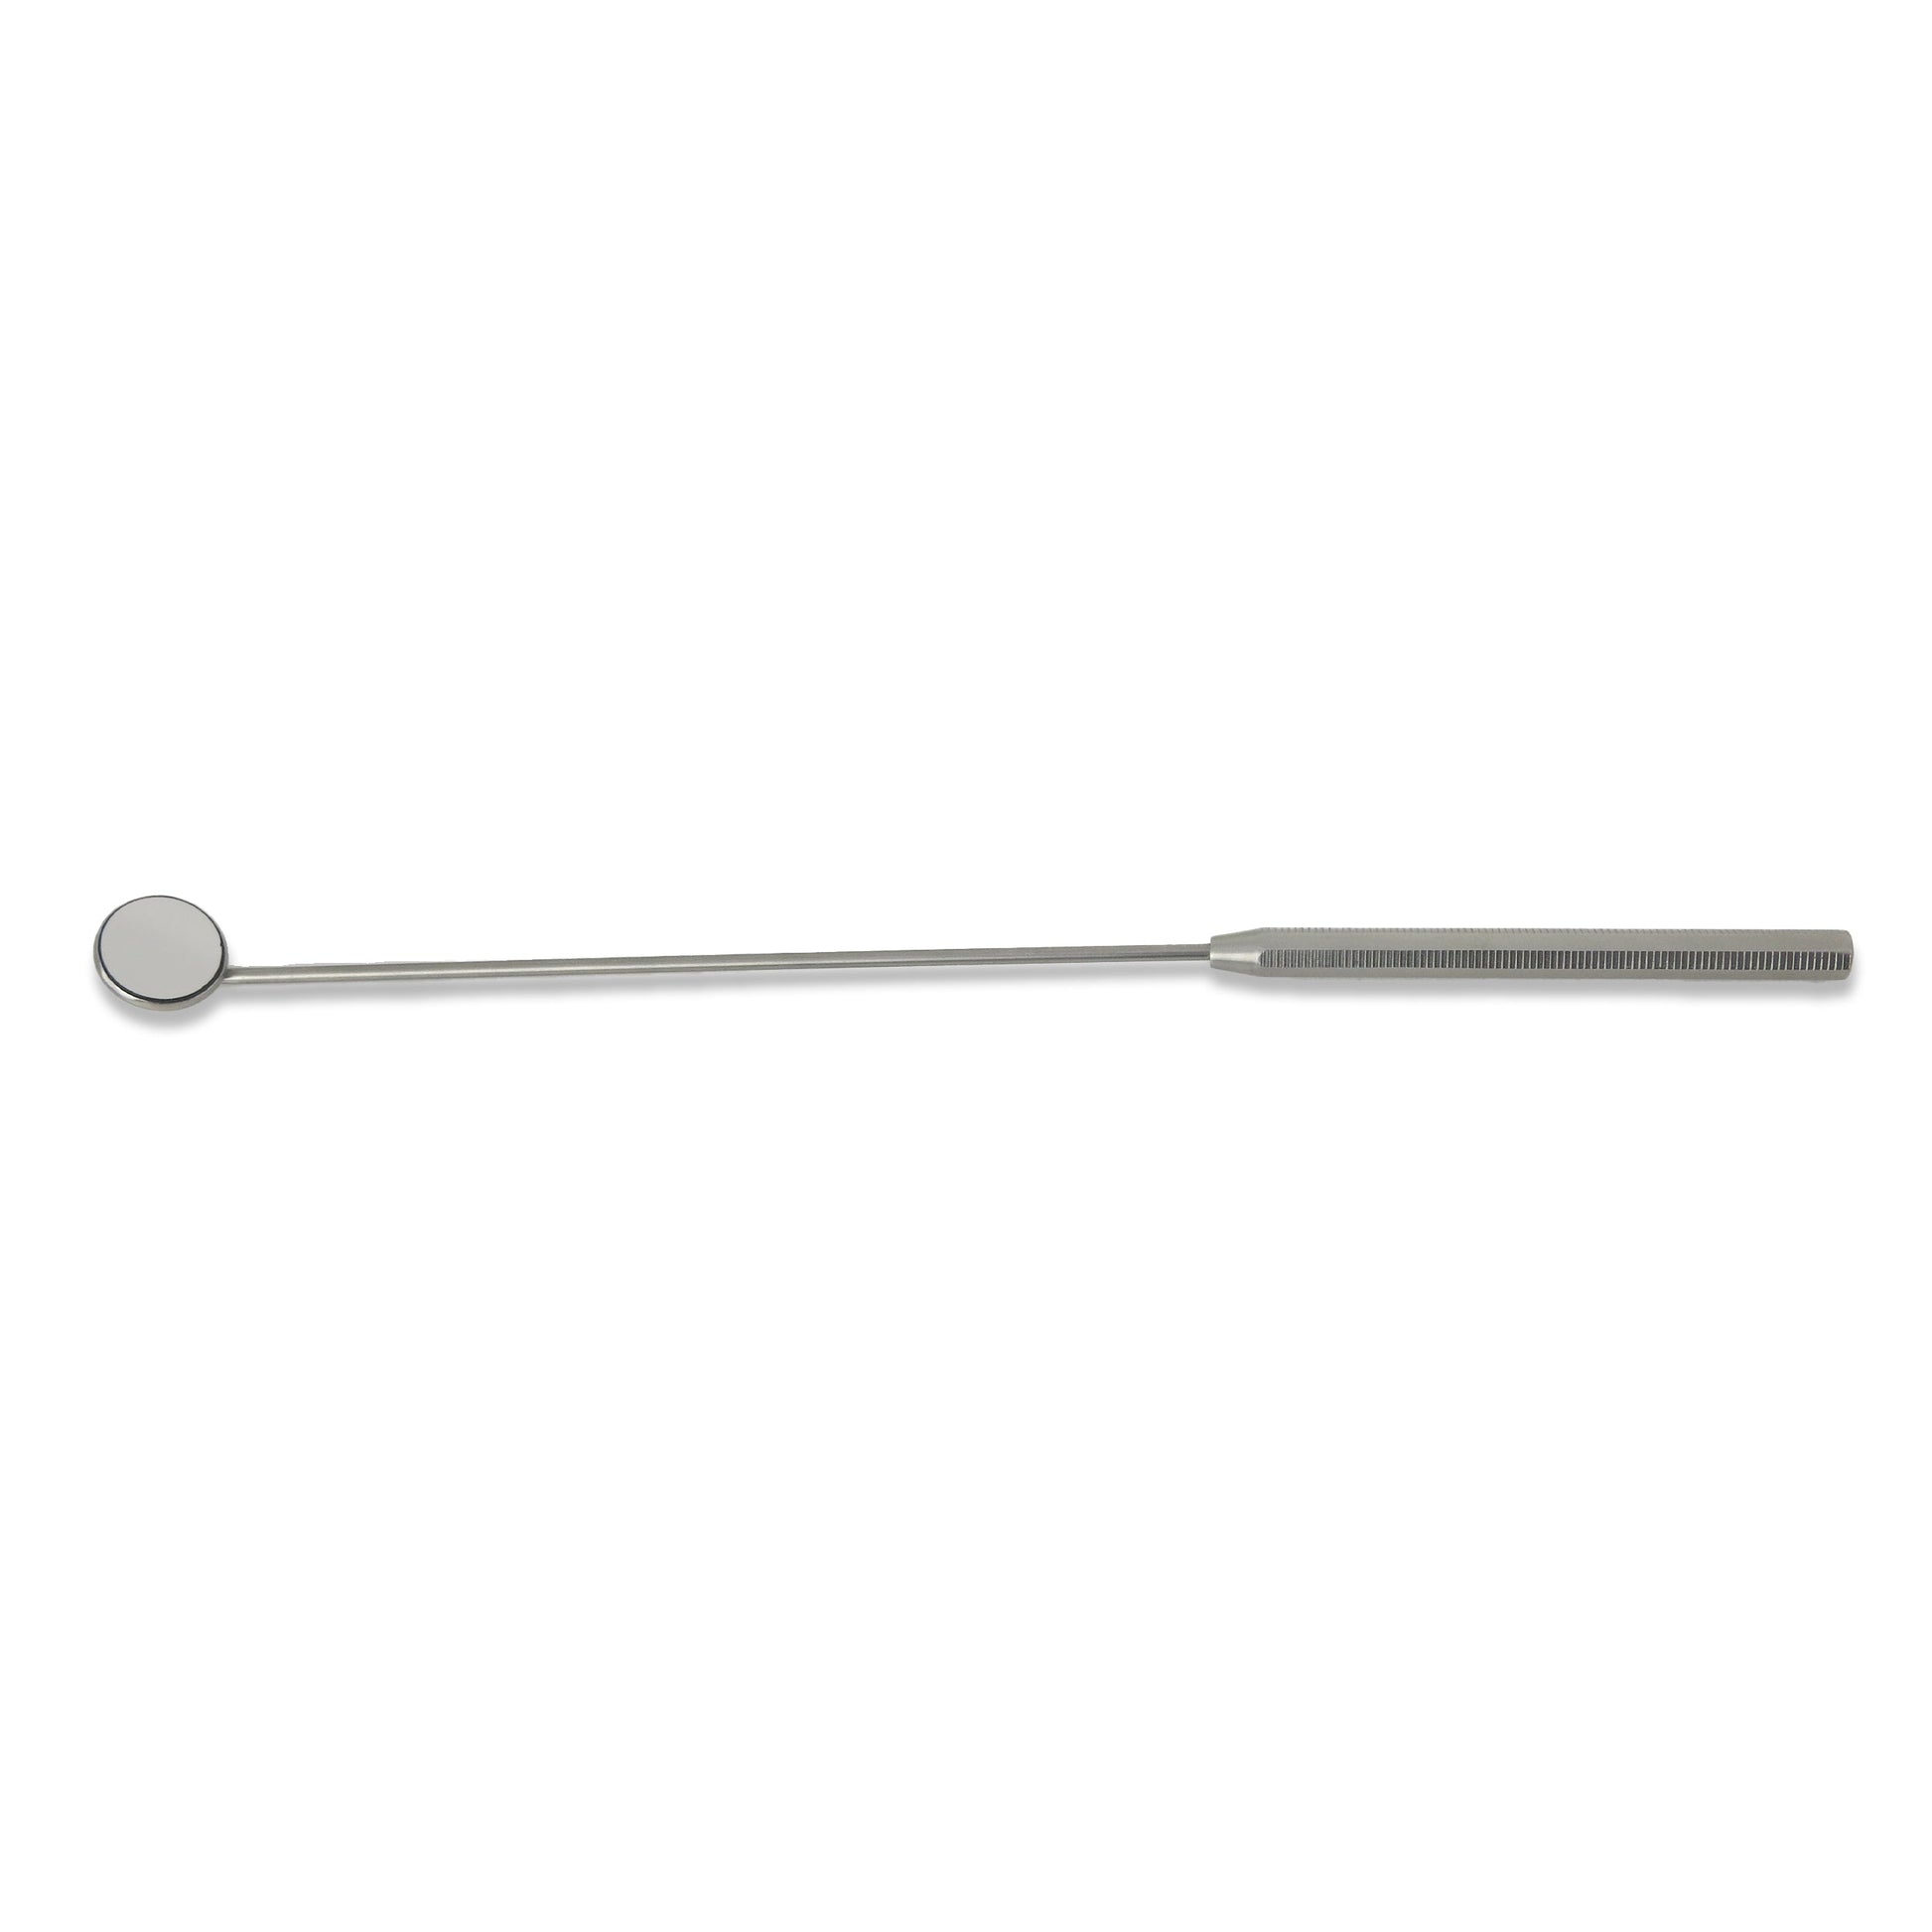 Laryngeal Mouth Mirror-1, 16 mm Dia with Handle - Osung USA 